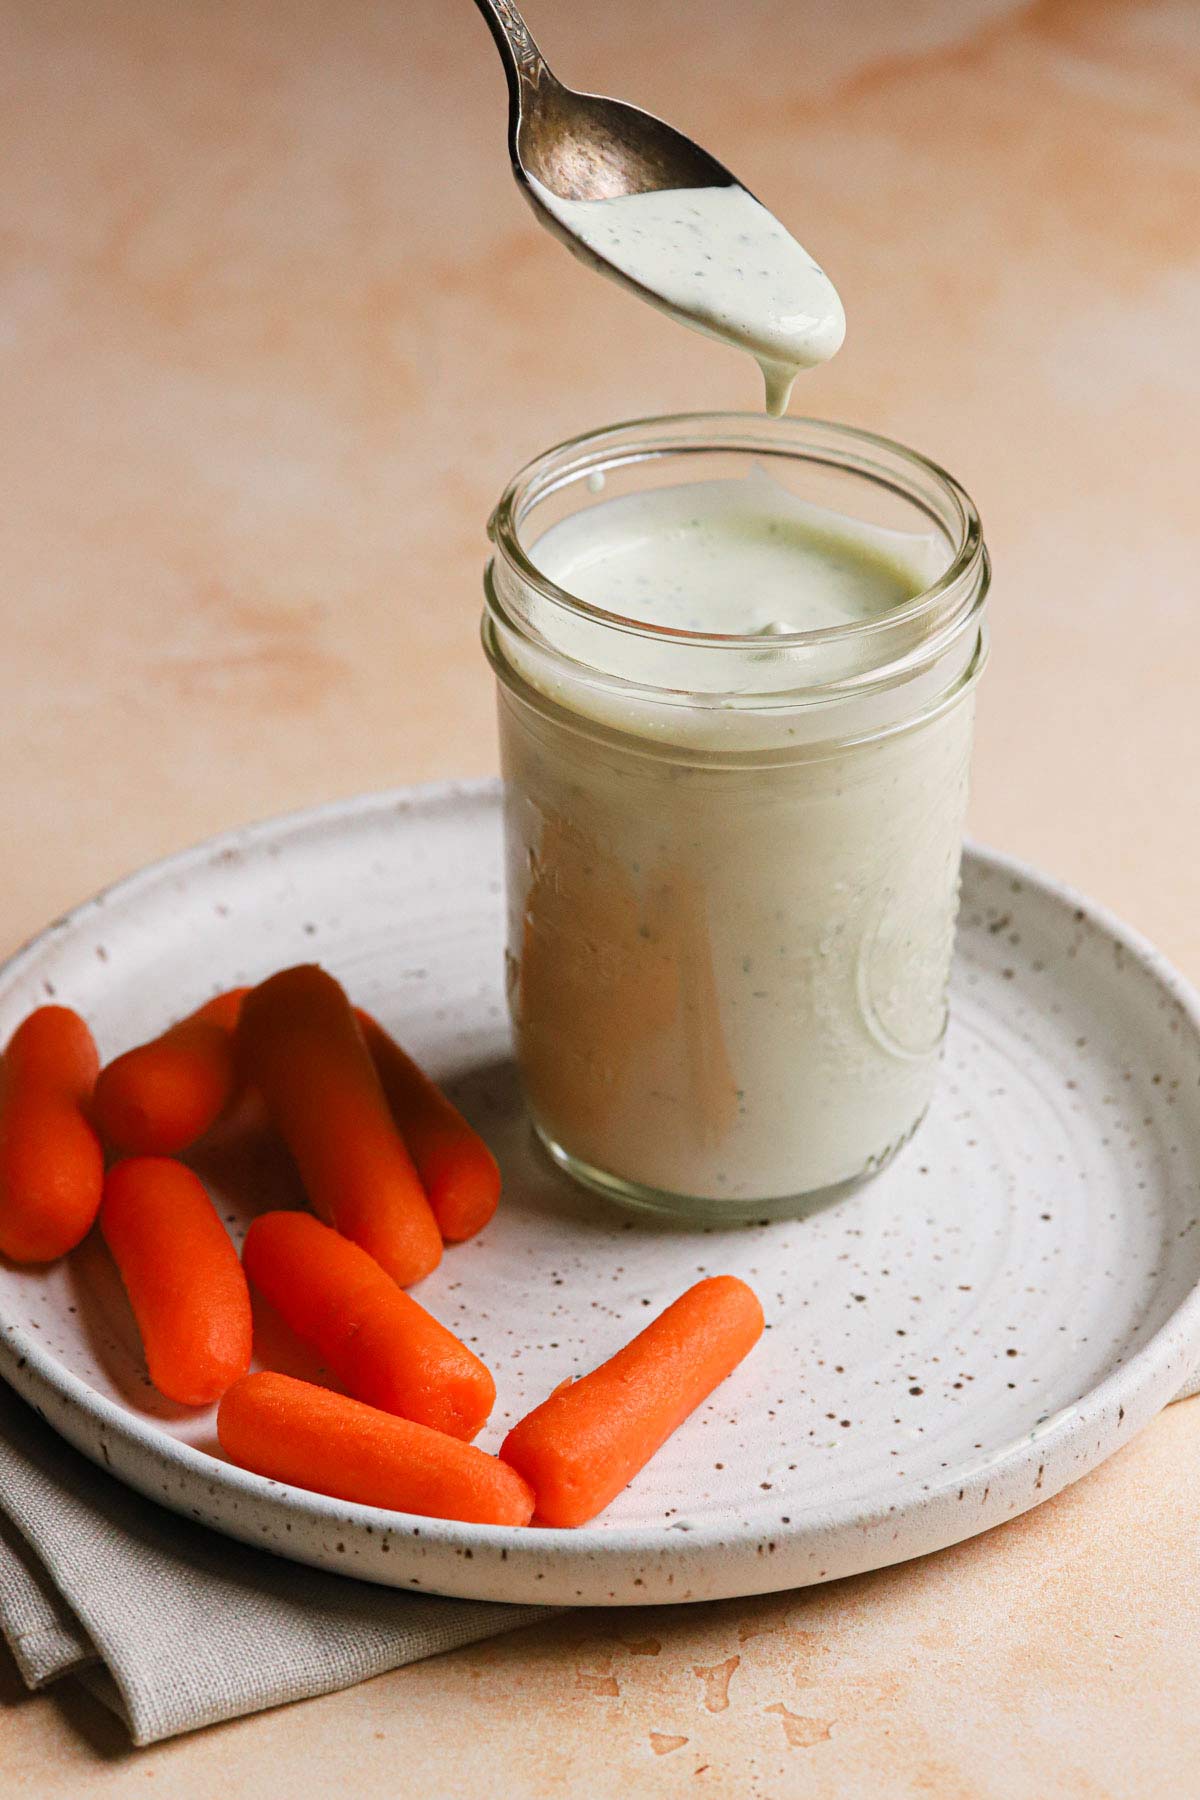 Spoon dipped into jar of homemade ranch dressing on a plate with baby carrots.